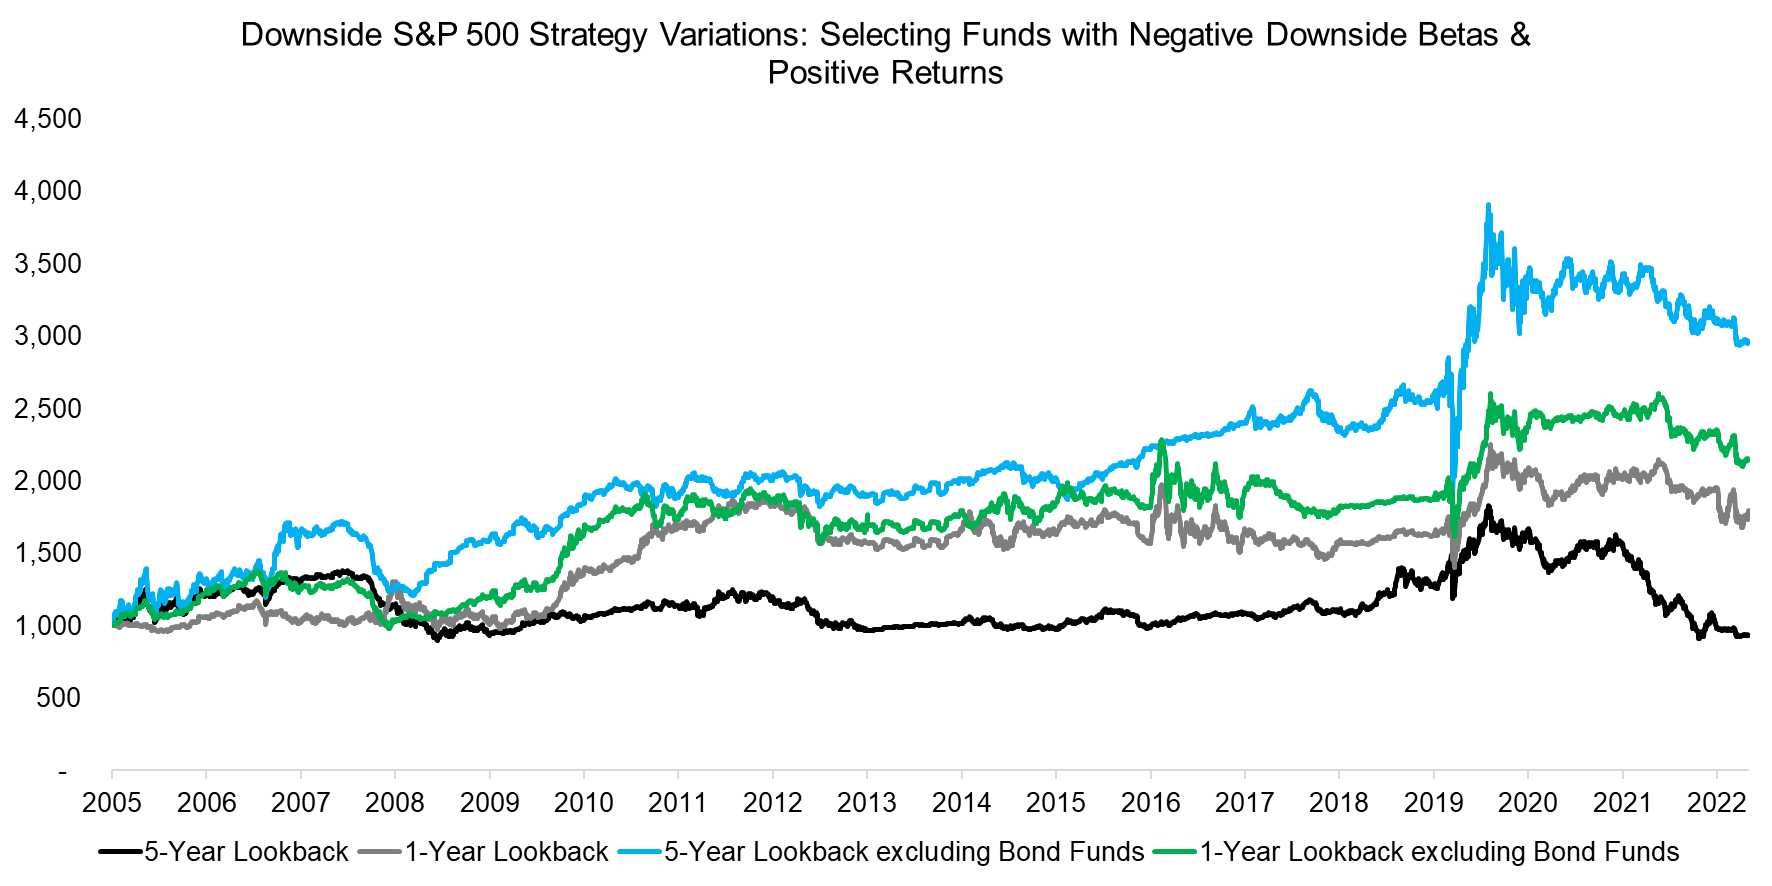 Downside S&P 500 Strategy Variations Selecting Funds with Negative Downside Betas &